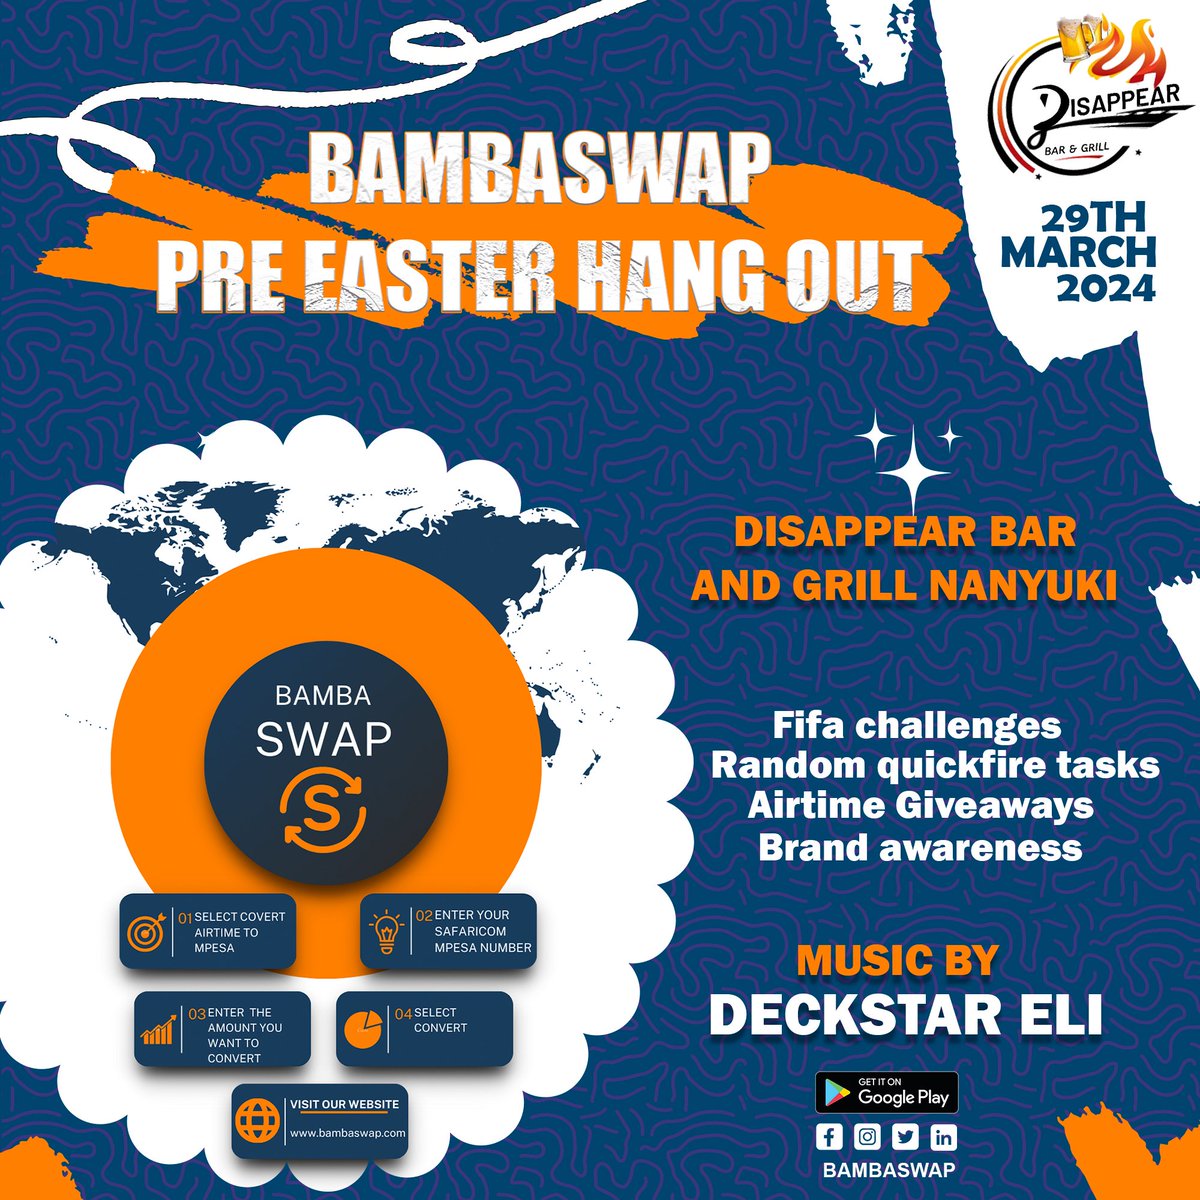 Pre Easter Fun Day 29th March pale Disappear Bar and Grill Nanyuki 🚨 Music,fun games,giveaways and more fun. #bambaswap #easter2024 #EasterNaSafariRally #bambaradio #trends #foryoupage #WeekendVibes #weekendfun